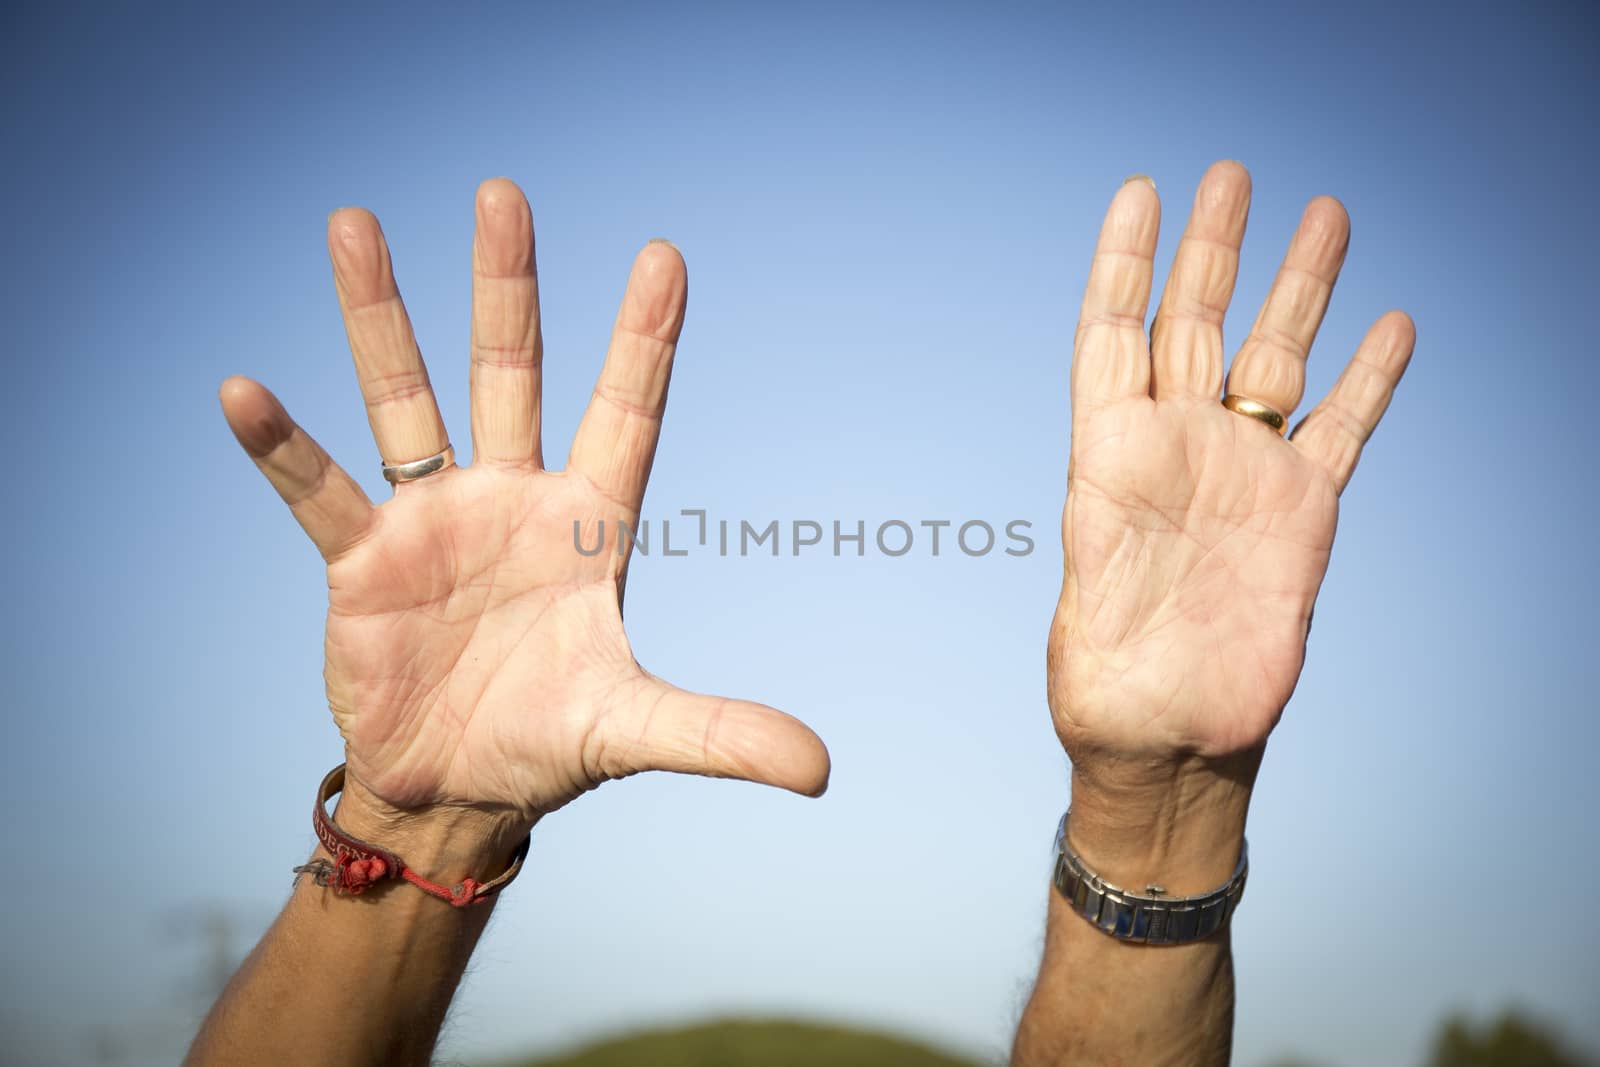 Man with only nine fingers